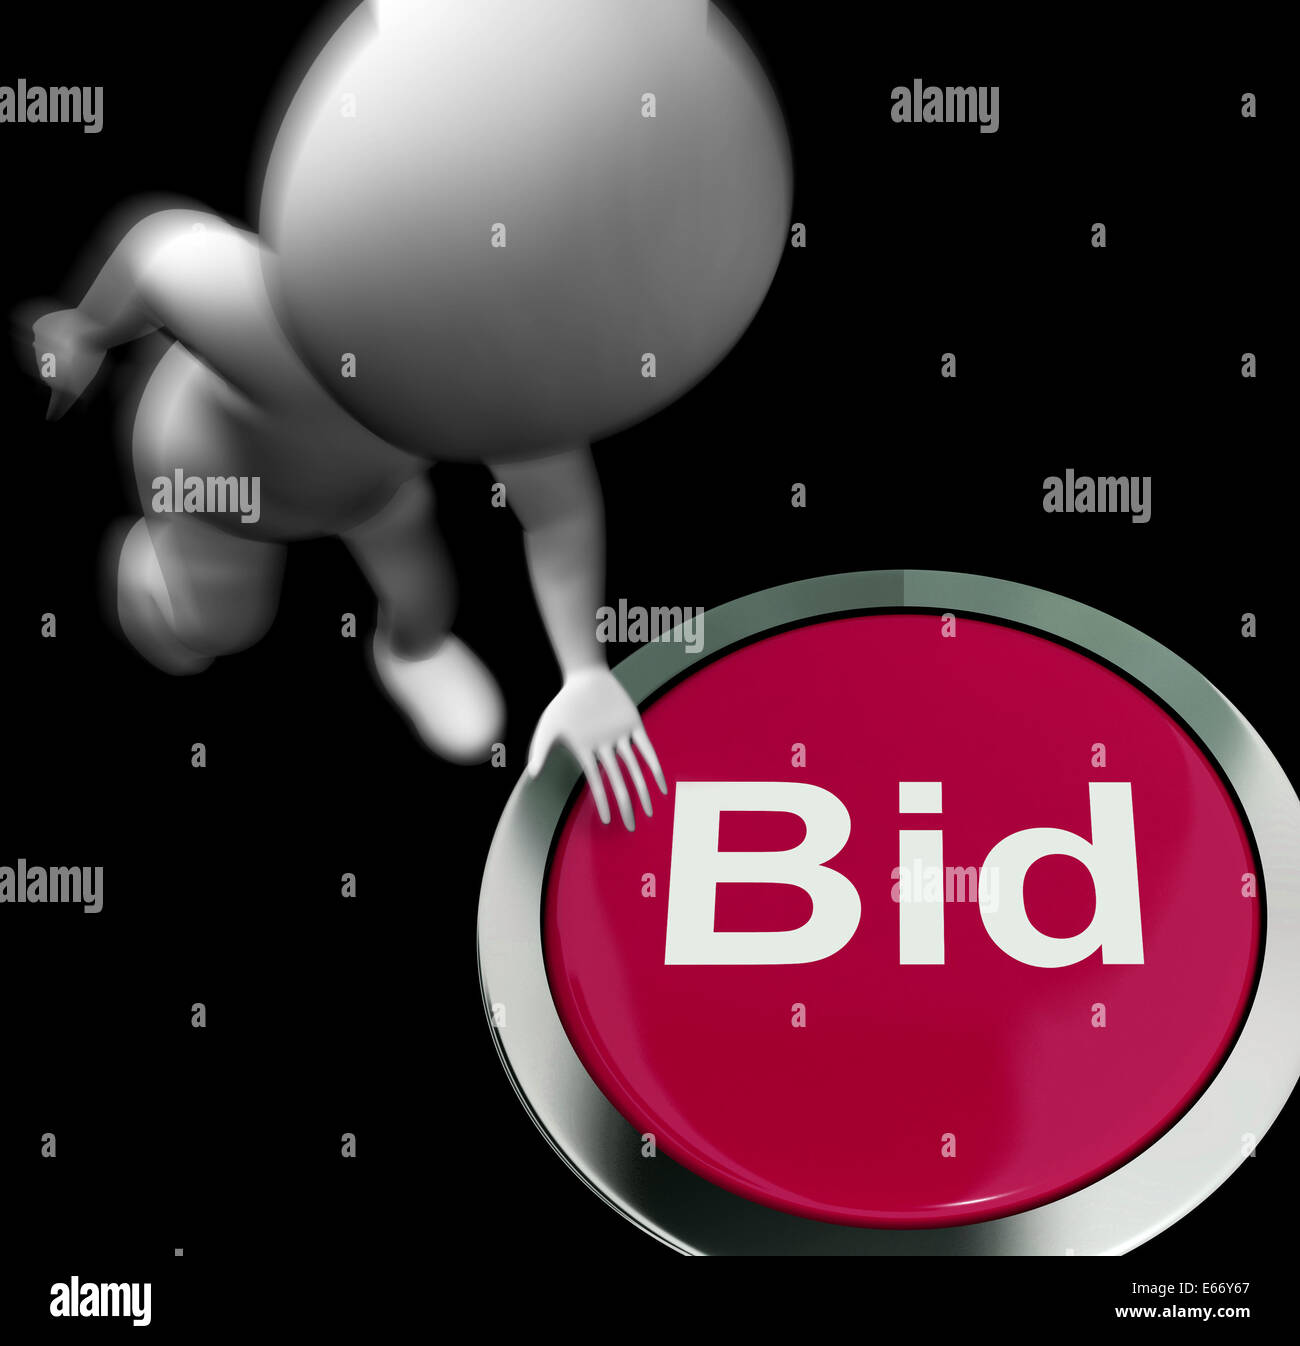 Bid Pressed Showing Auction Buying And Selling Stock Photo